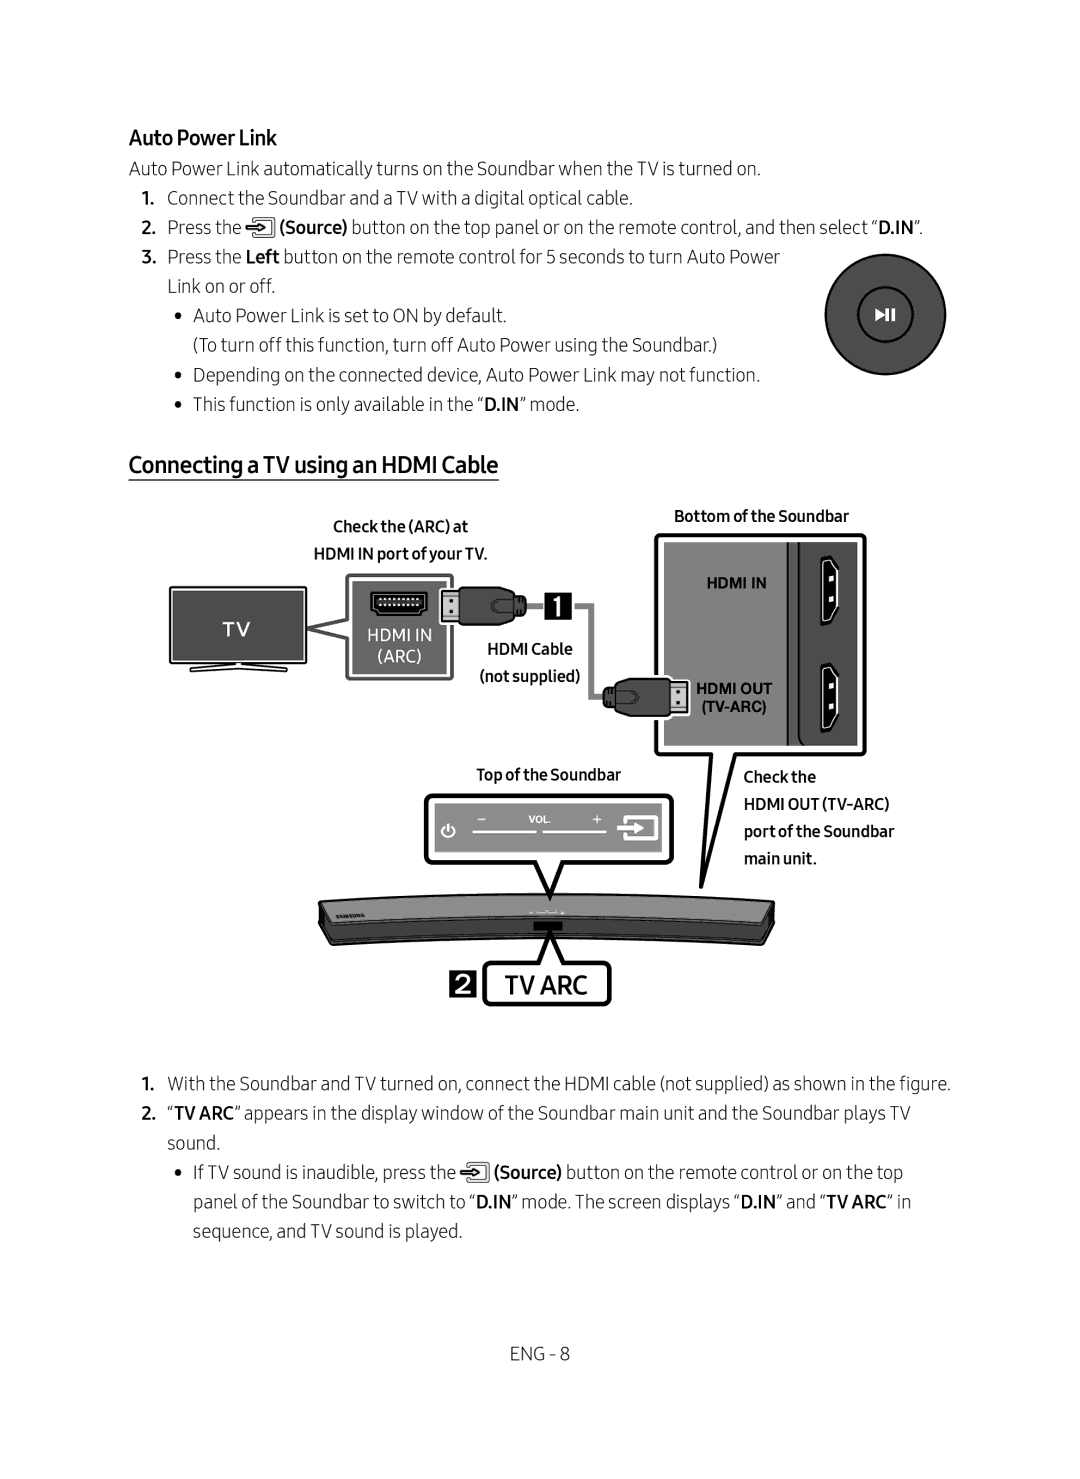 Samsung HW-M4500/EN manual Connecting a TV using an Hdmi Cable, Auto Power Link, Check the ARC at Hdmi in port of your TV 